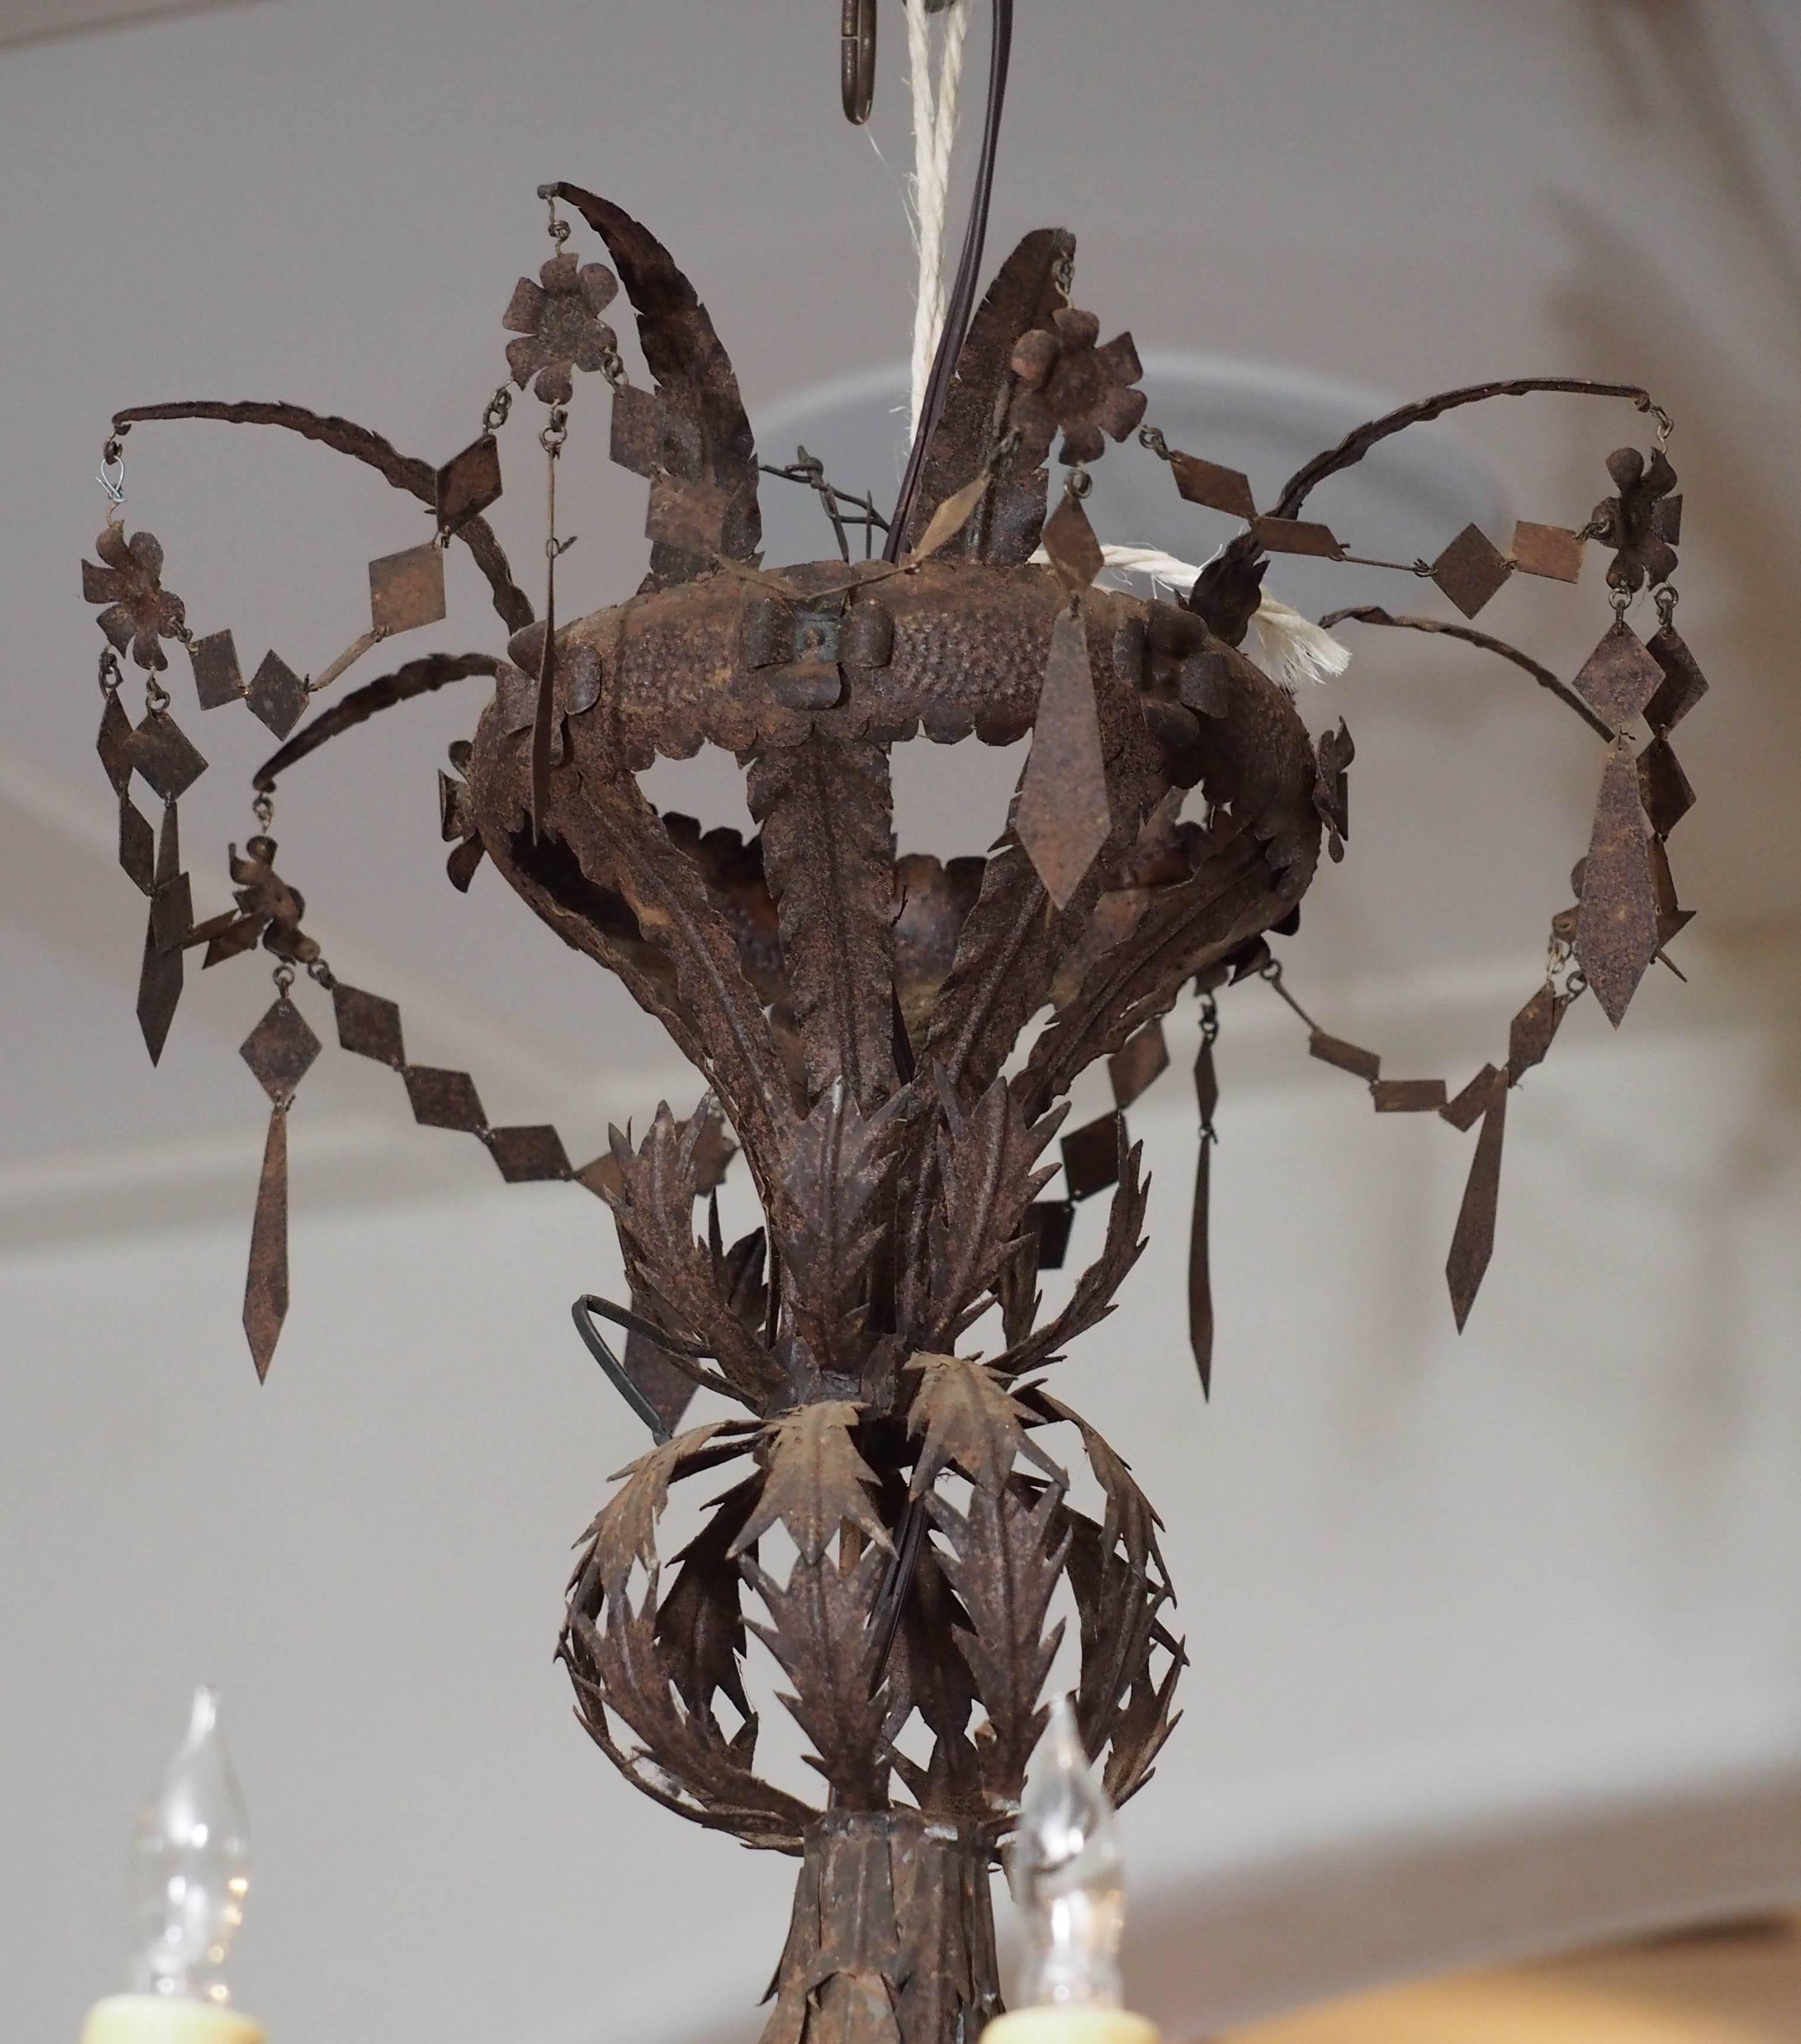 Early rare and unique Spanish Louis XVI style eight-arm iron chandelier with hand-cut medallions and wax sleeves from a small chapel in Spain. This fixture has been recently re-wired for American current, circa 1810.